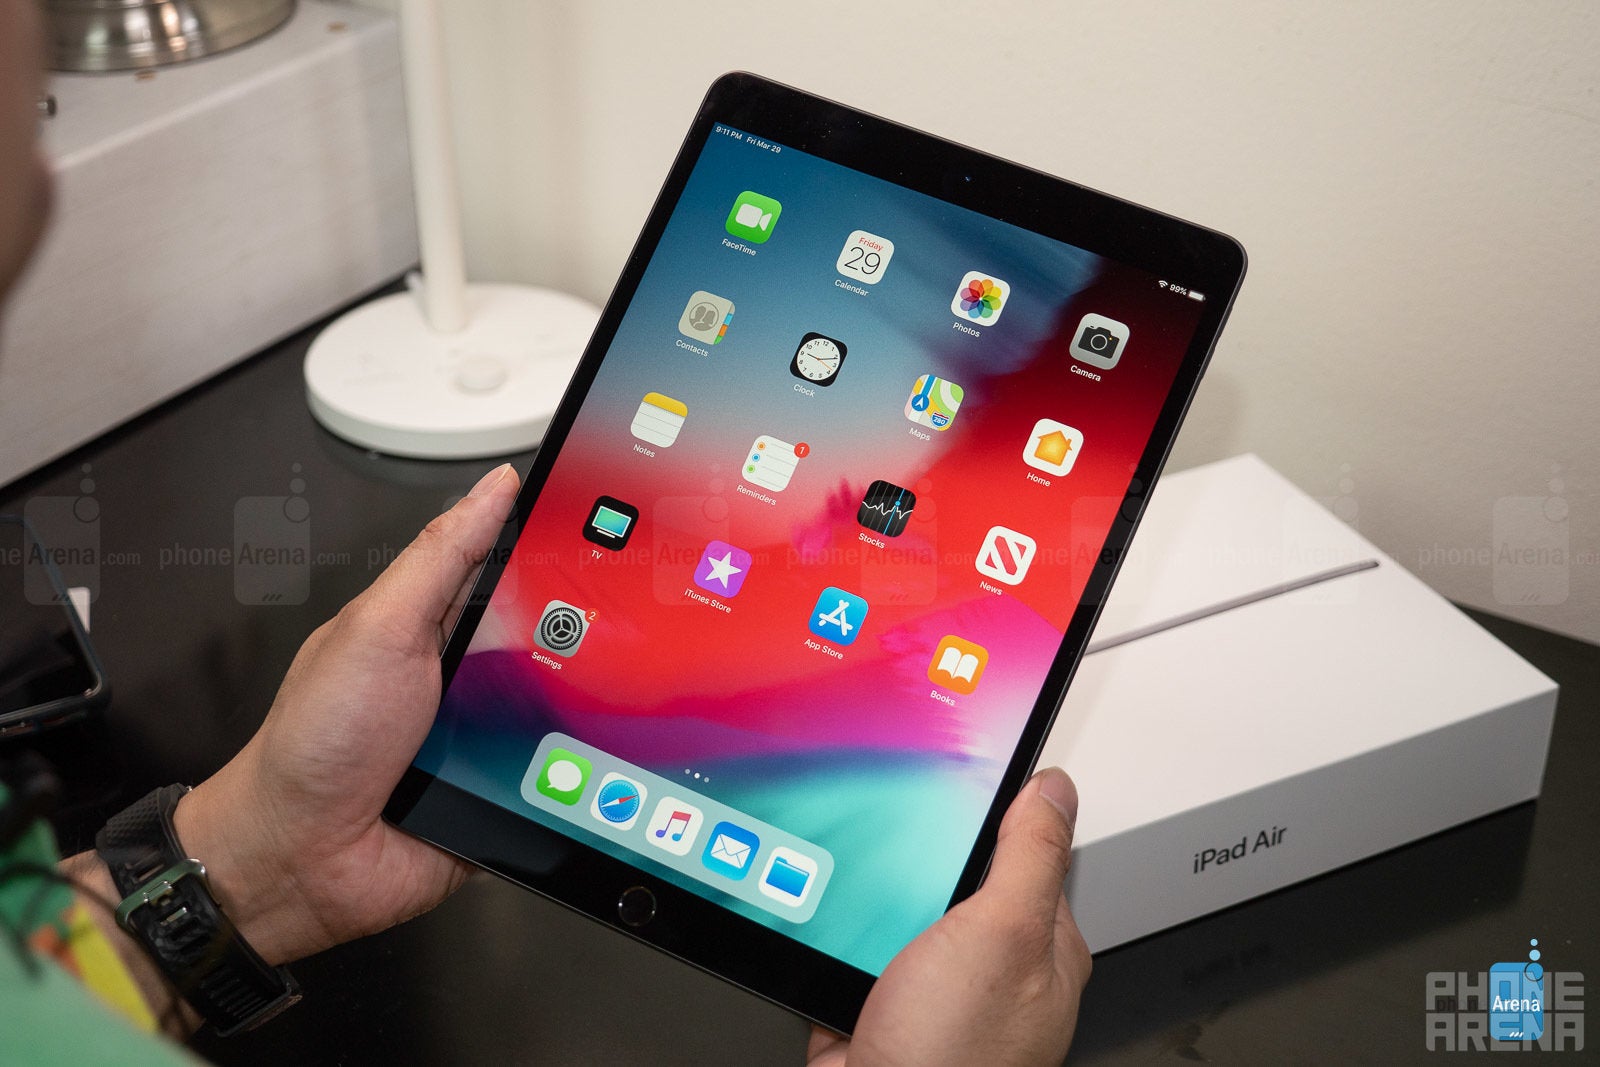 iPad Air (2019) review: More 'pro' than it looks